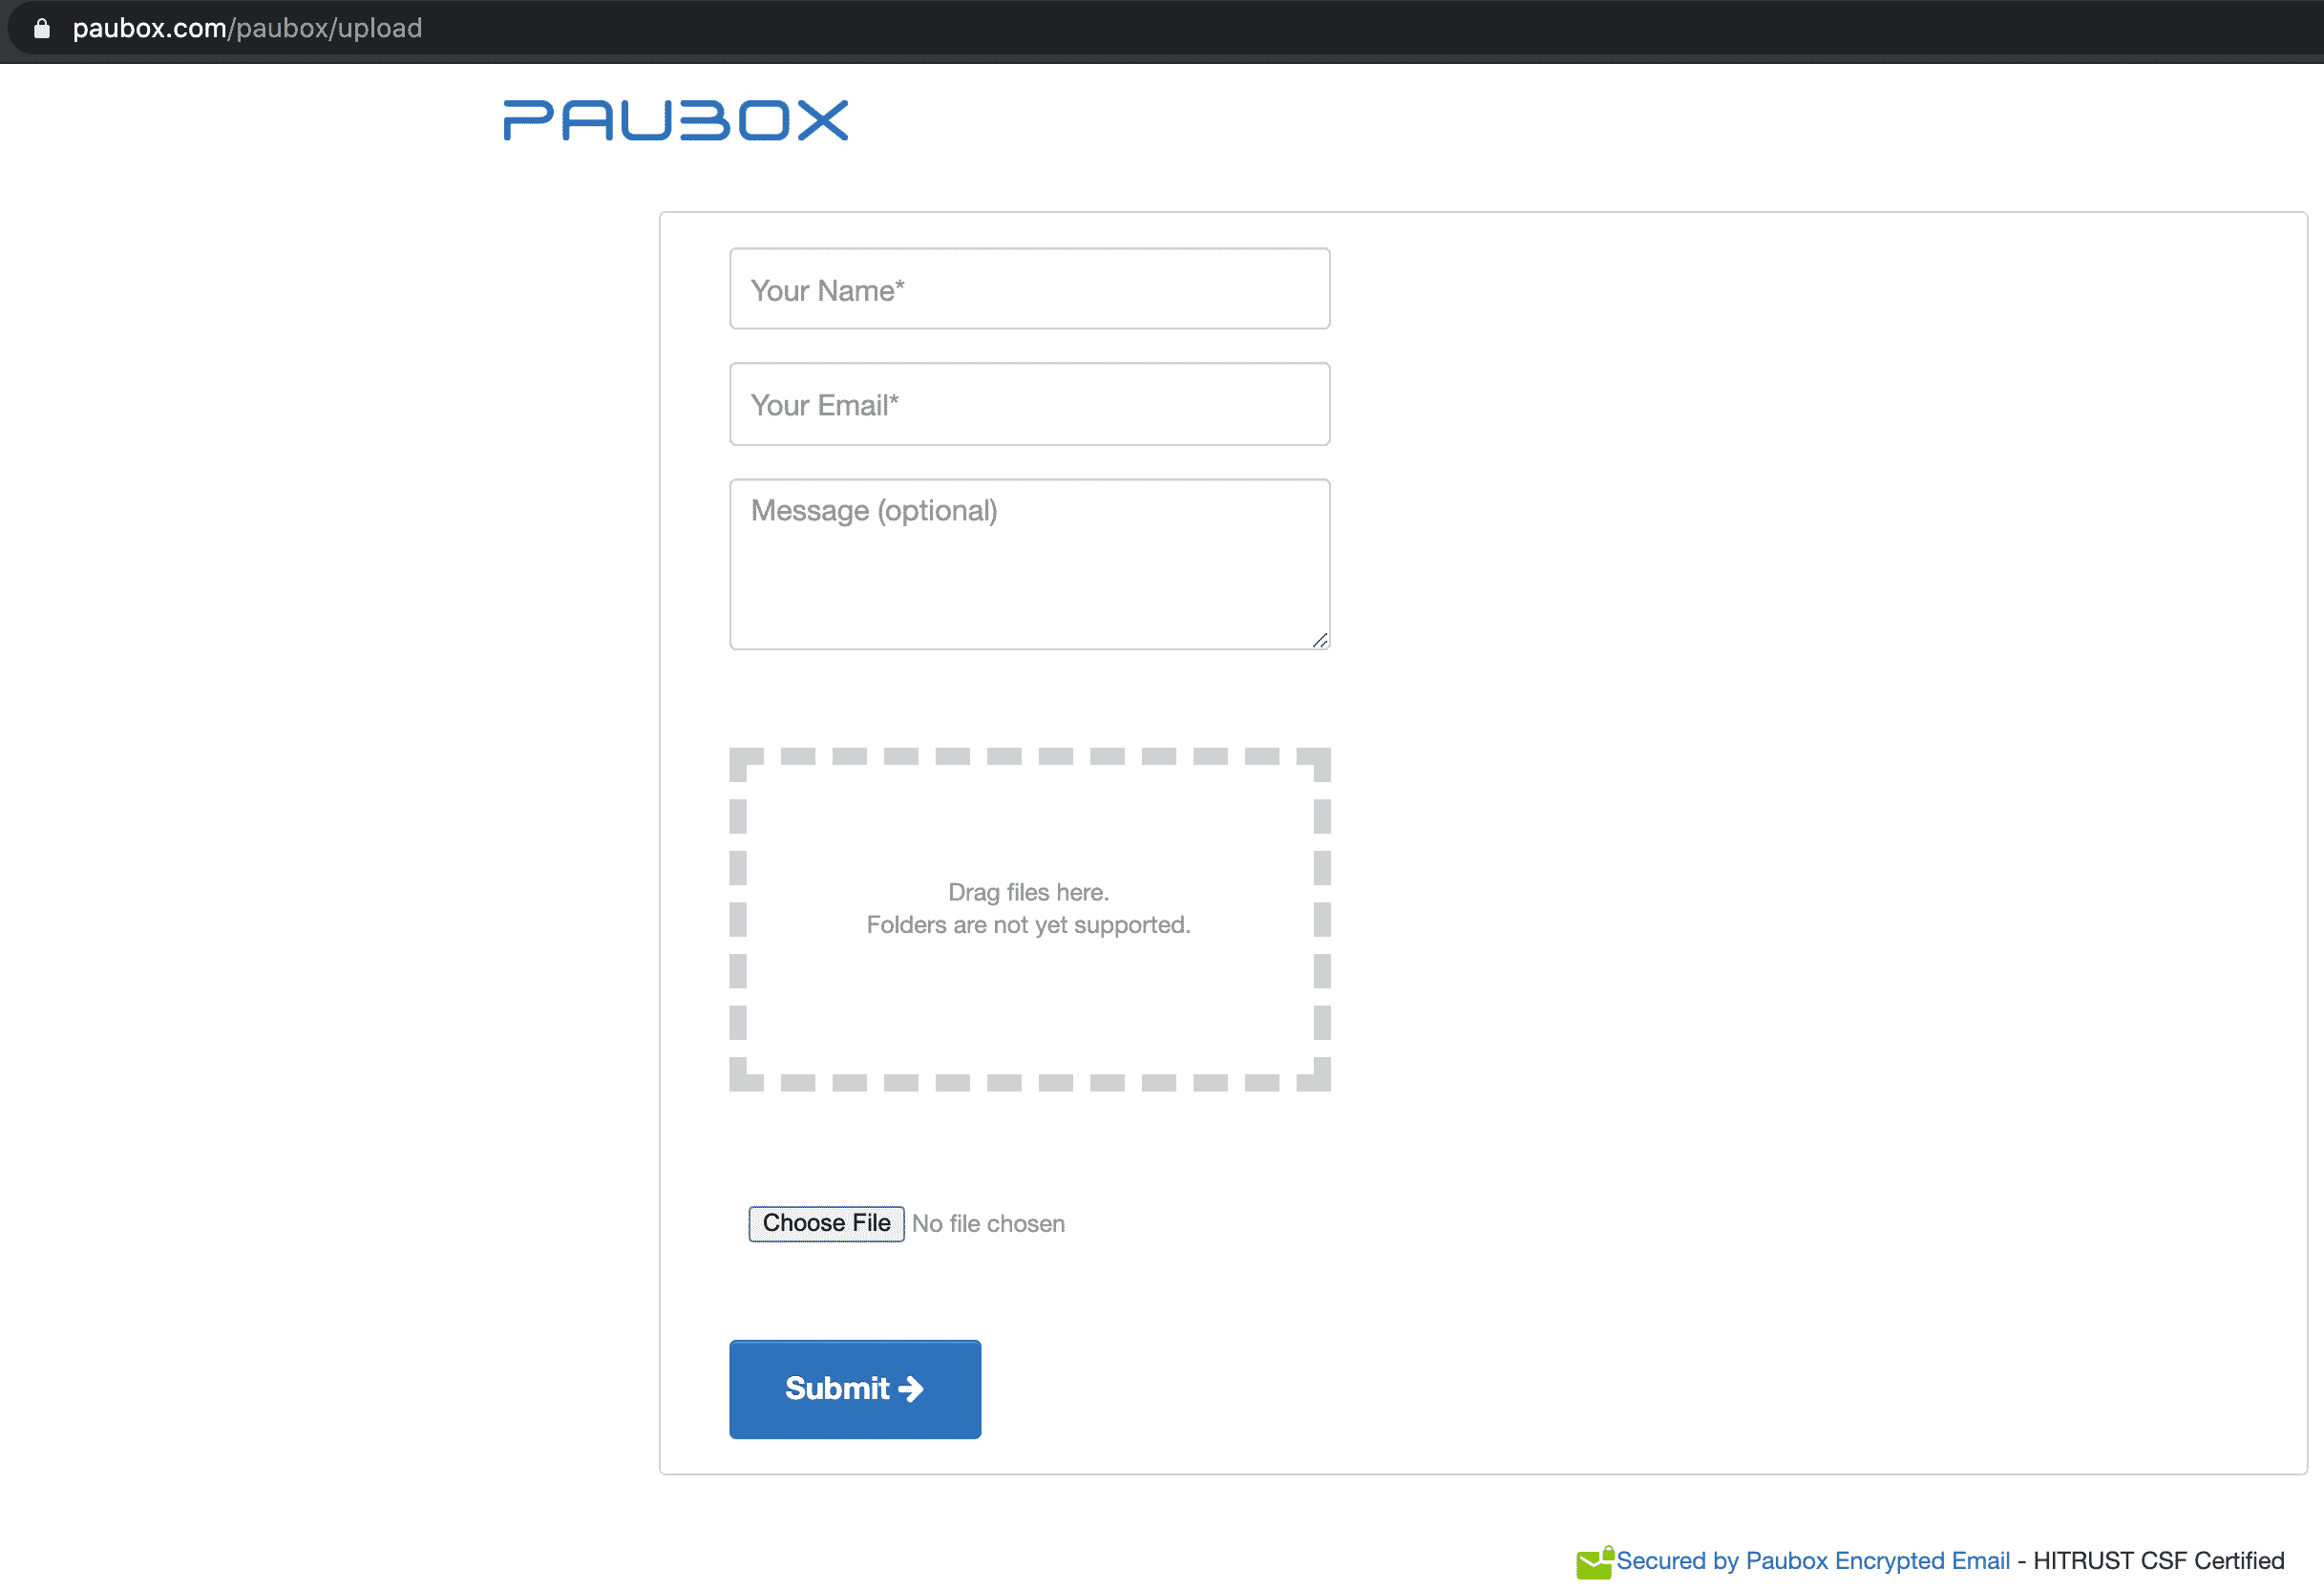 How to Use a Secure Contact Form with Paubox